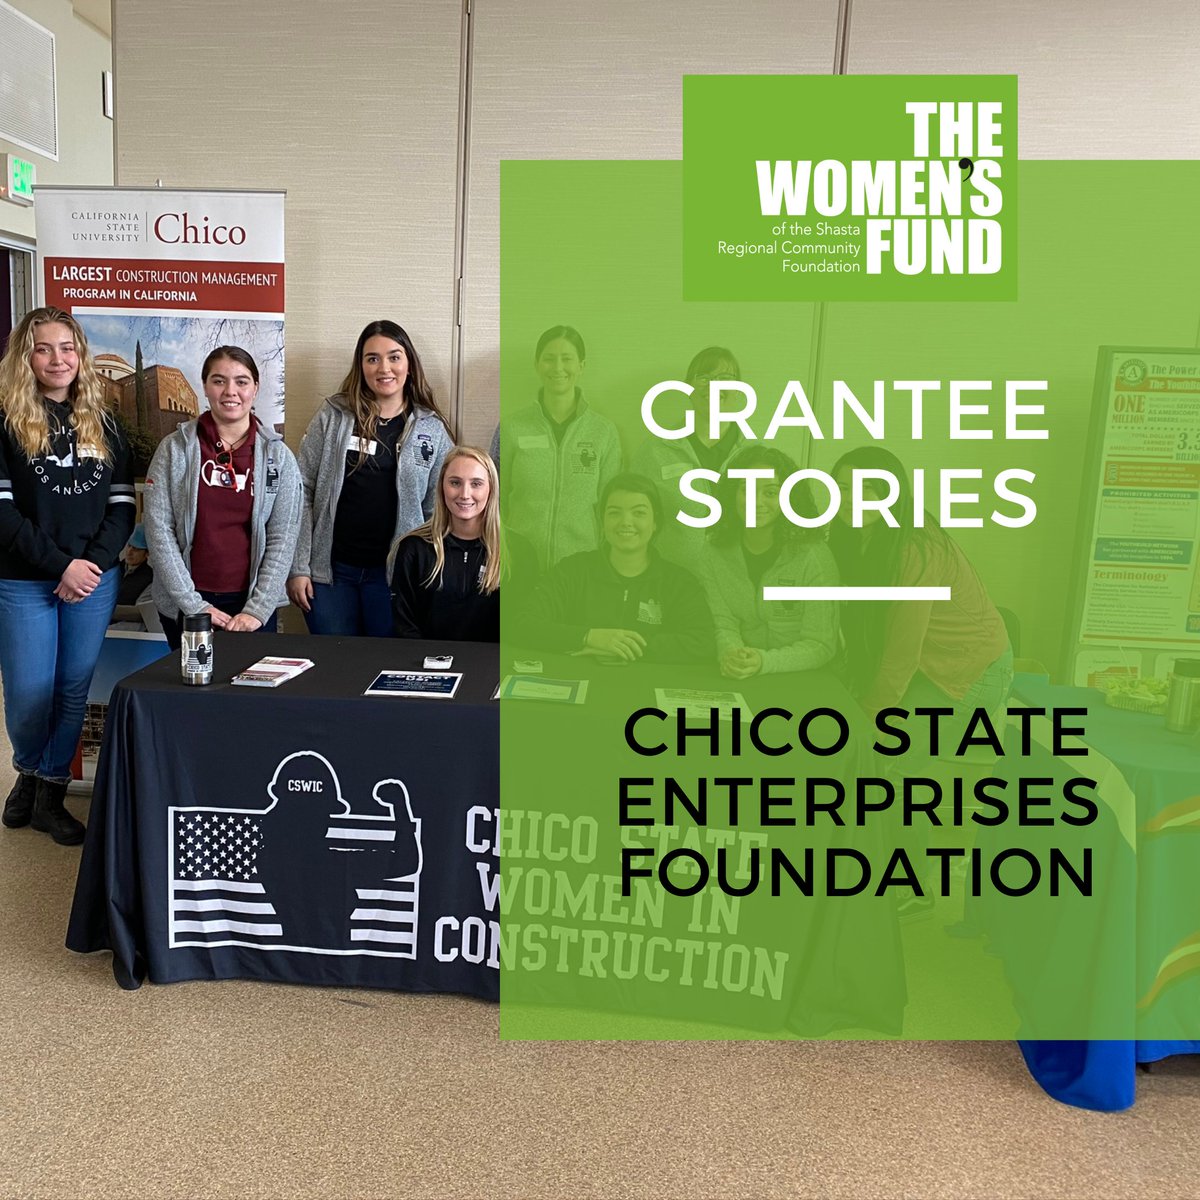 Where Does The Women's Fund Grant Money Go?

Grantee Stories: Chico State Enterprises Foundation

womensfundredding.org/grantee-storie…

#collectivephilanthropy #WomensFund #OurImpact